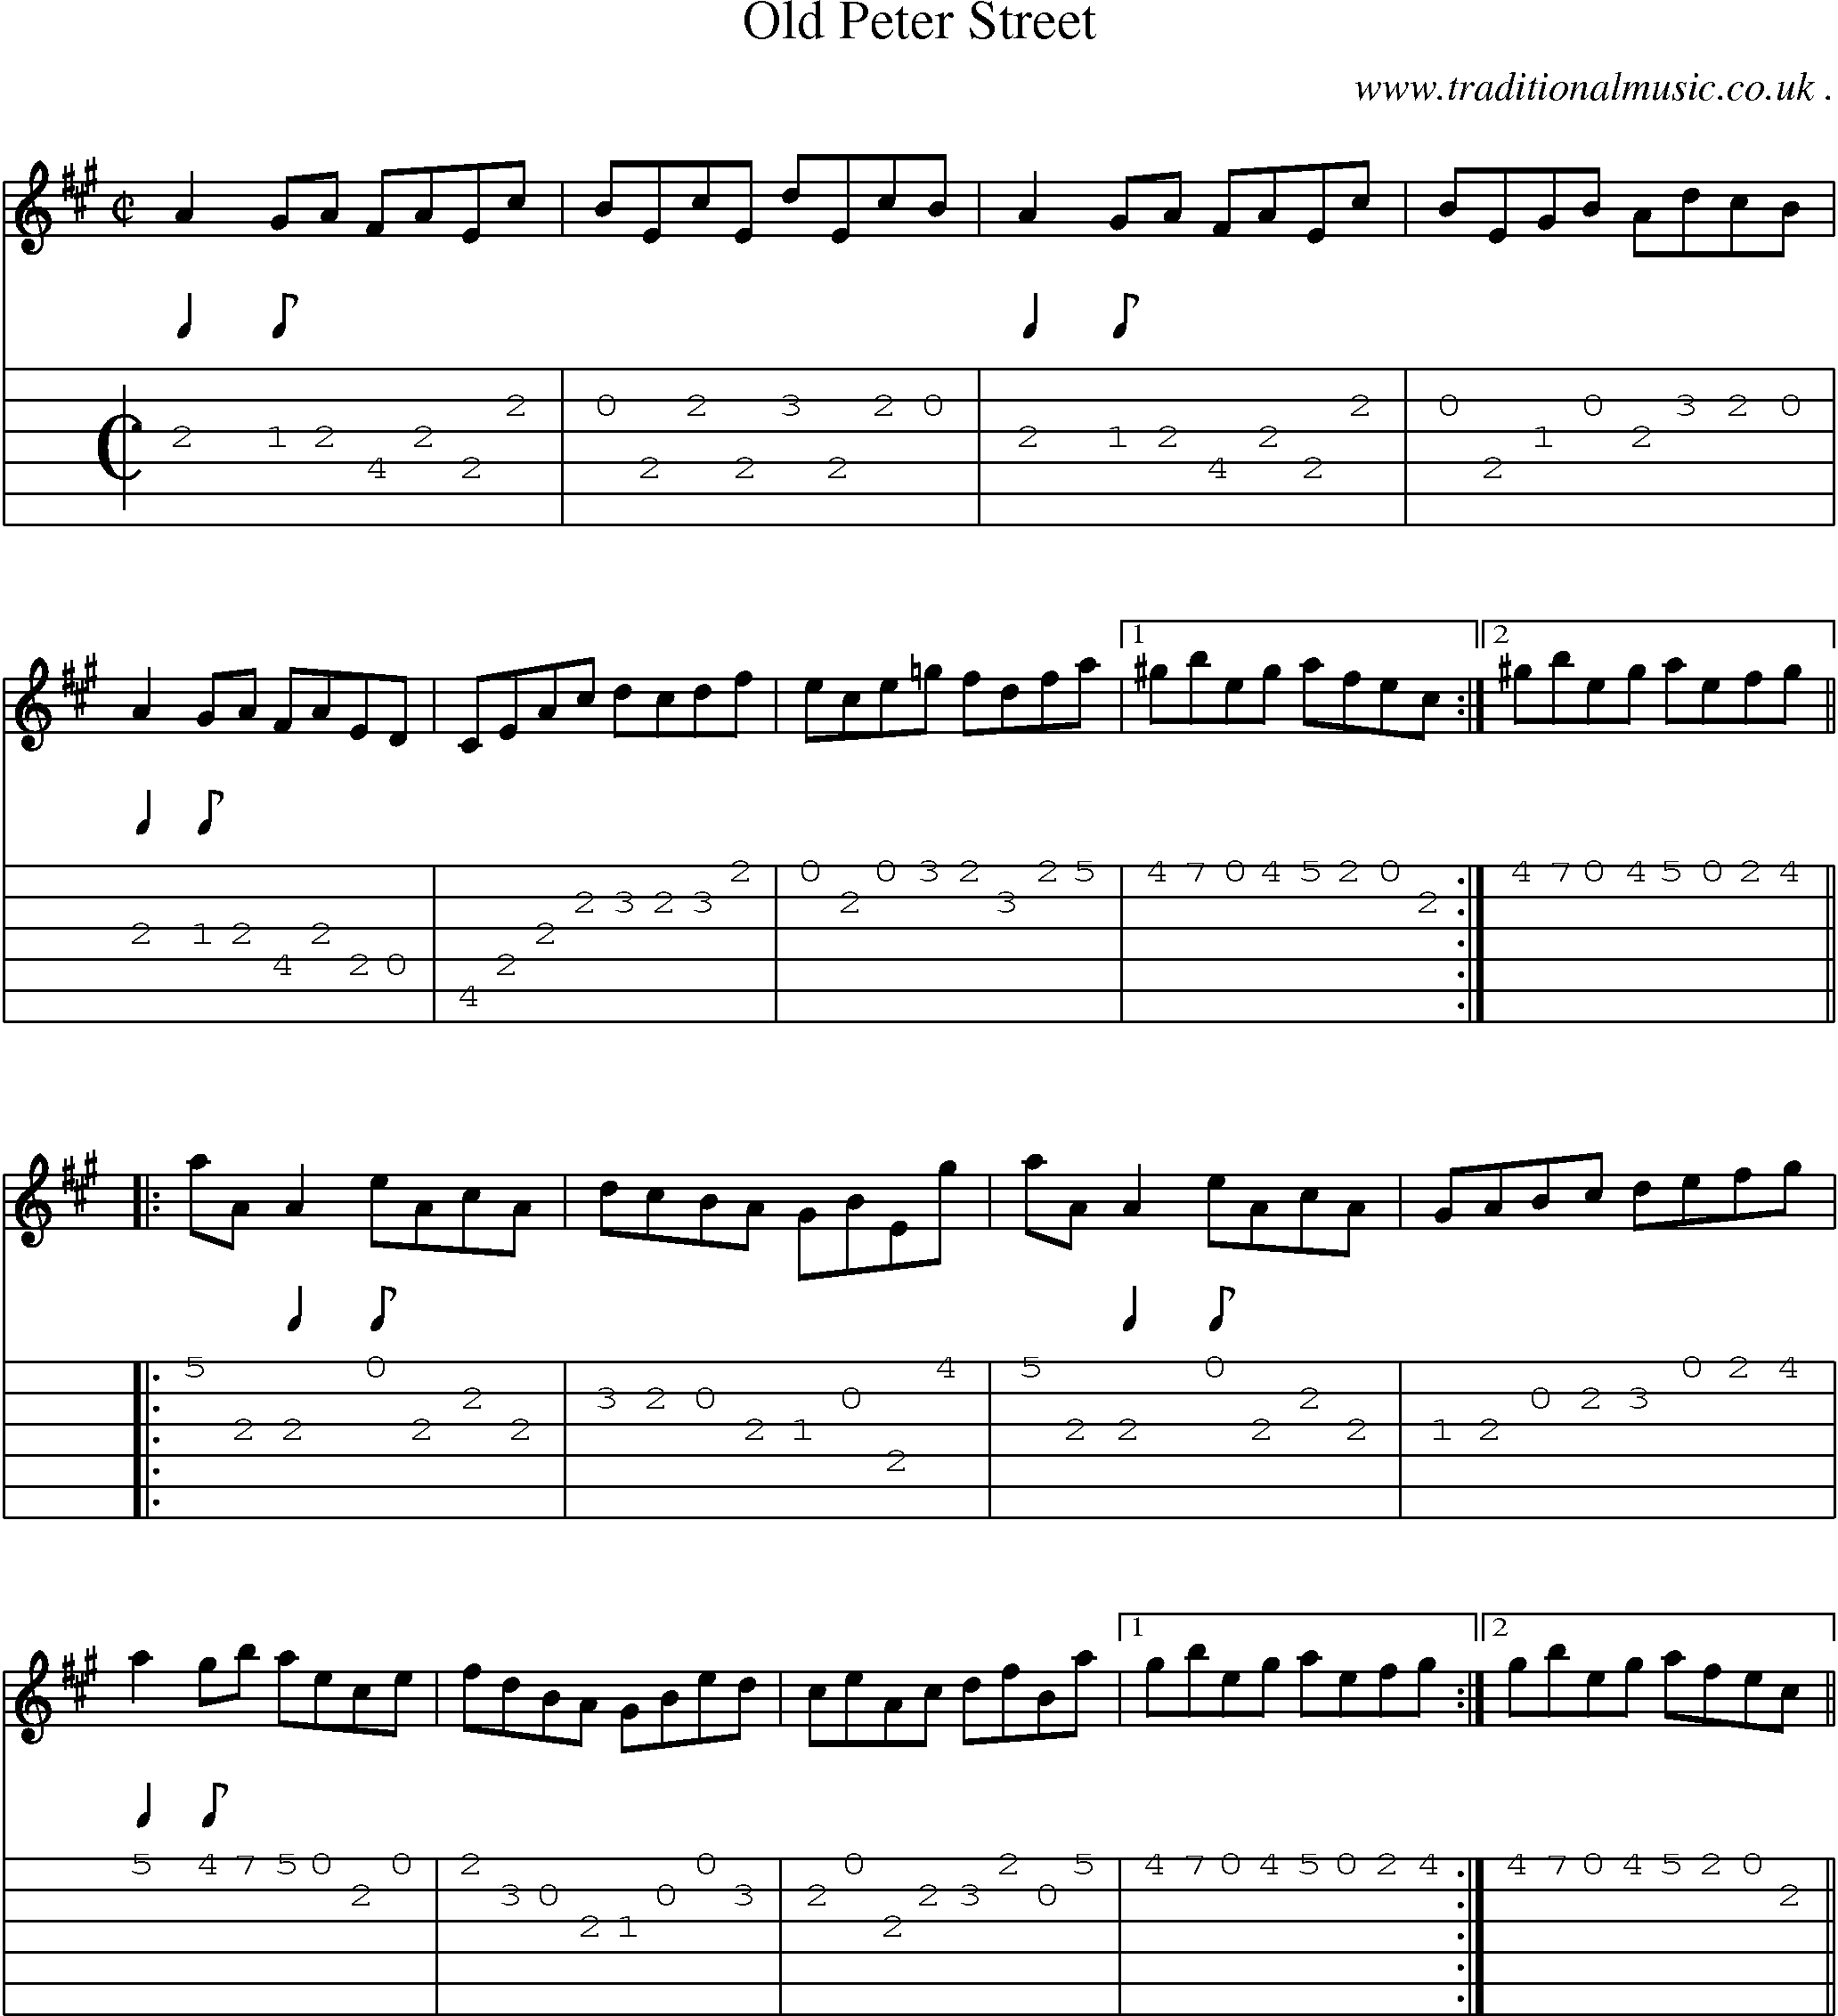 Sheet-Music and Guitar Tabs for Old Peter Street